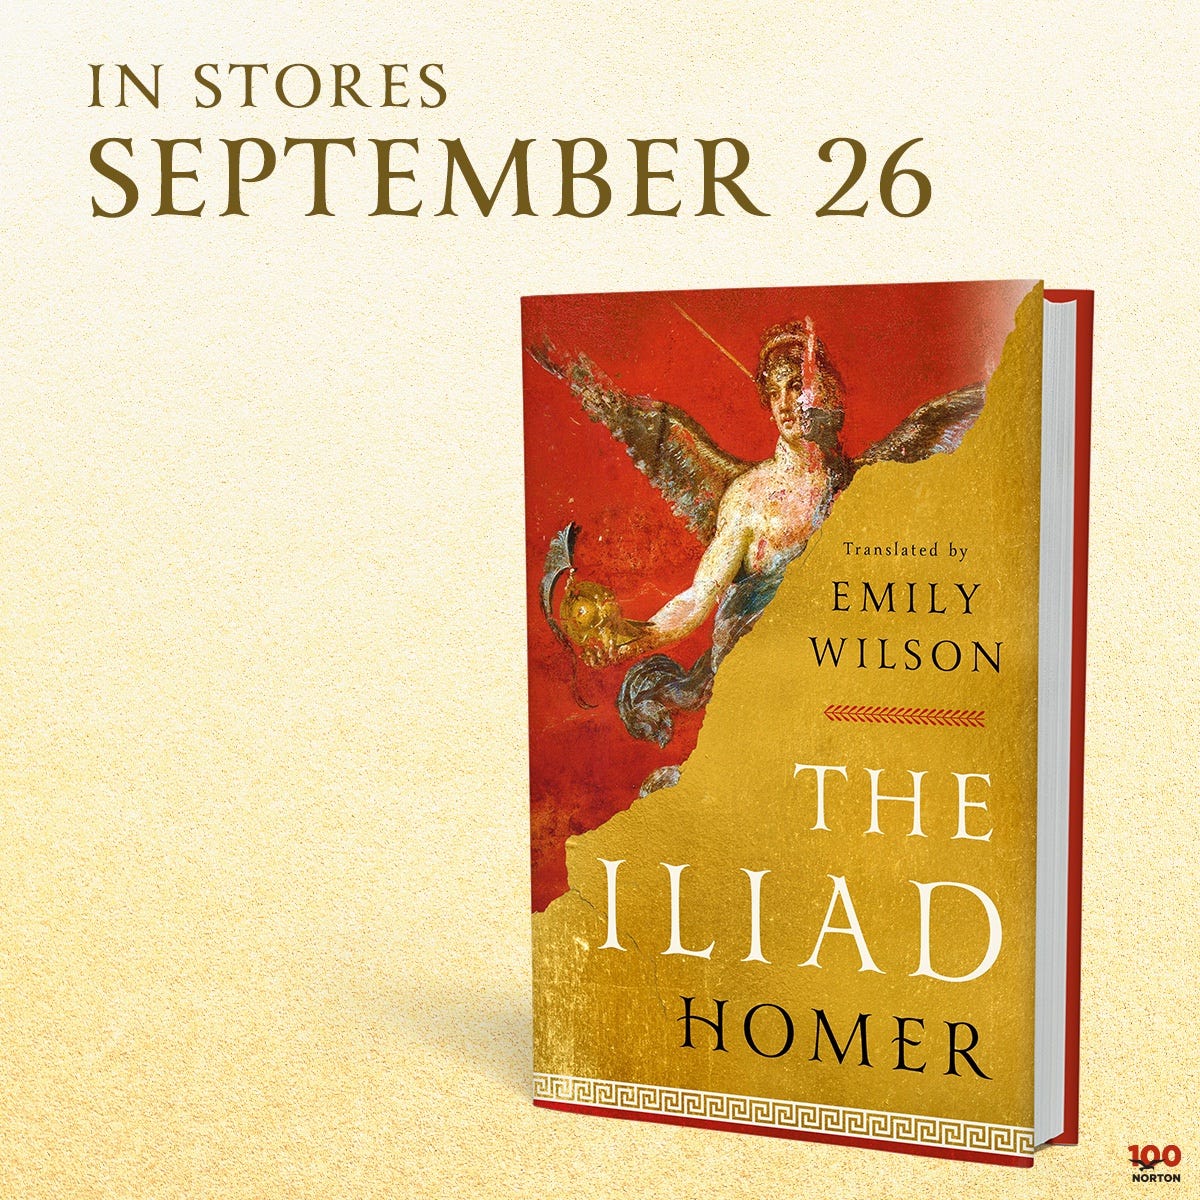 Dr Emily Wilson on Twitter: "This is the glorious cover design for my  forthcoming Iliad translation, featuring Victory. Everybody wants to be a  winner. (https://t.co/keRHpWbjgi, https://t.co/Z4dnZtSbwO)  https://t.co/OBer7pHhED" / Twitter